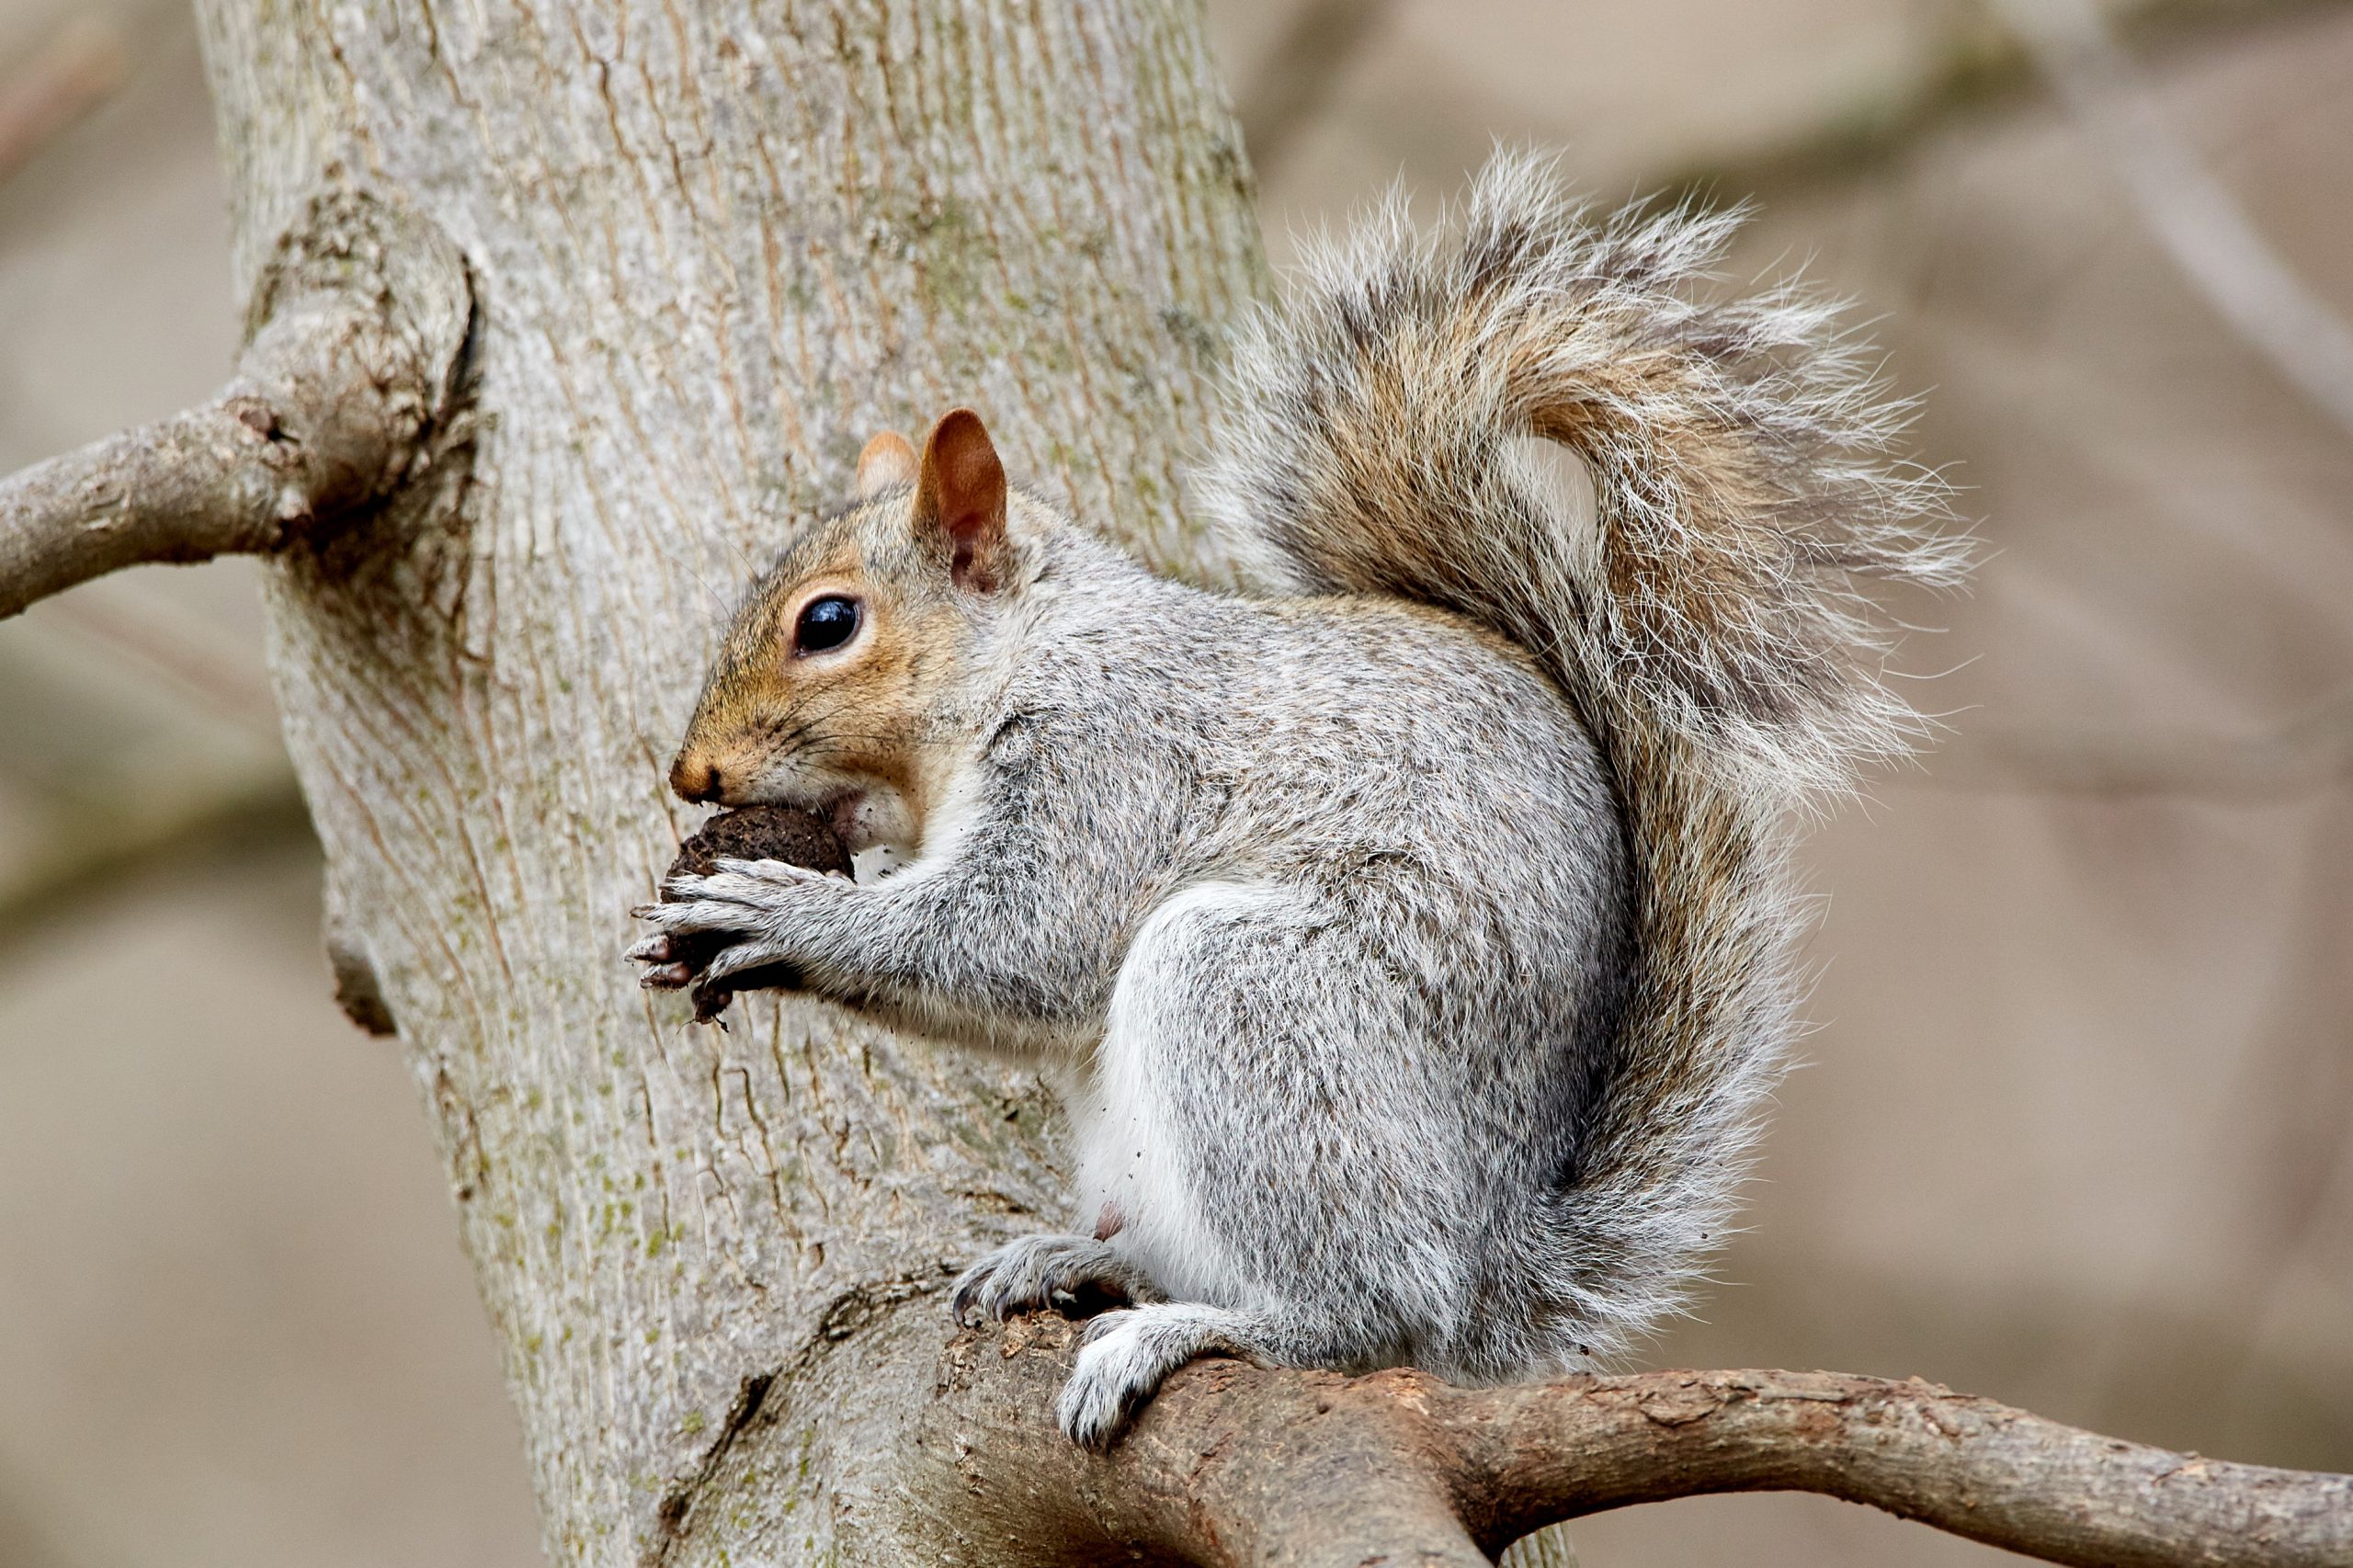 Feed your squirrel: How storytelling to one client makes your brand universally loveable